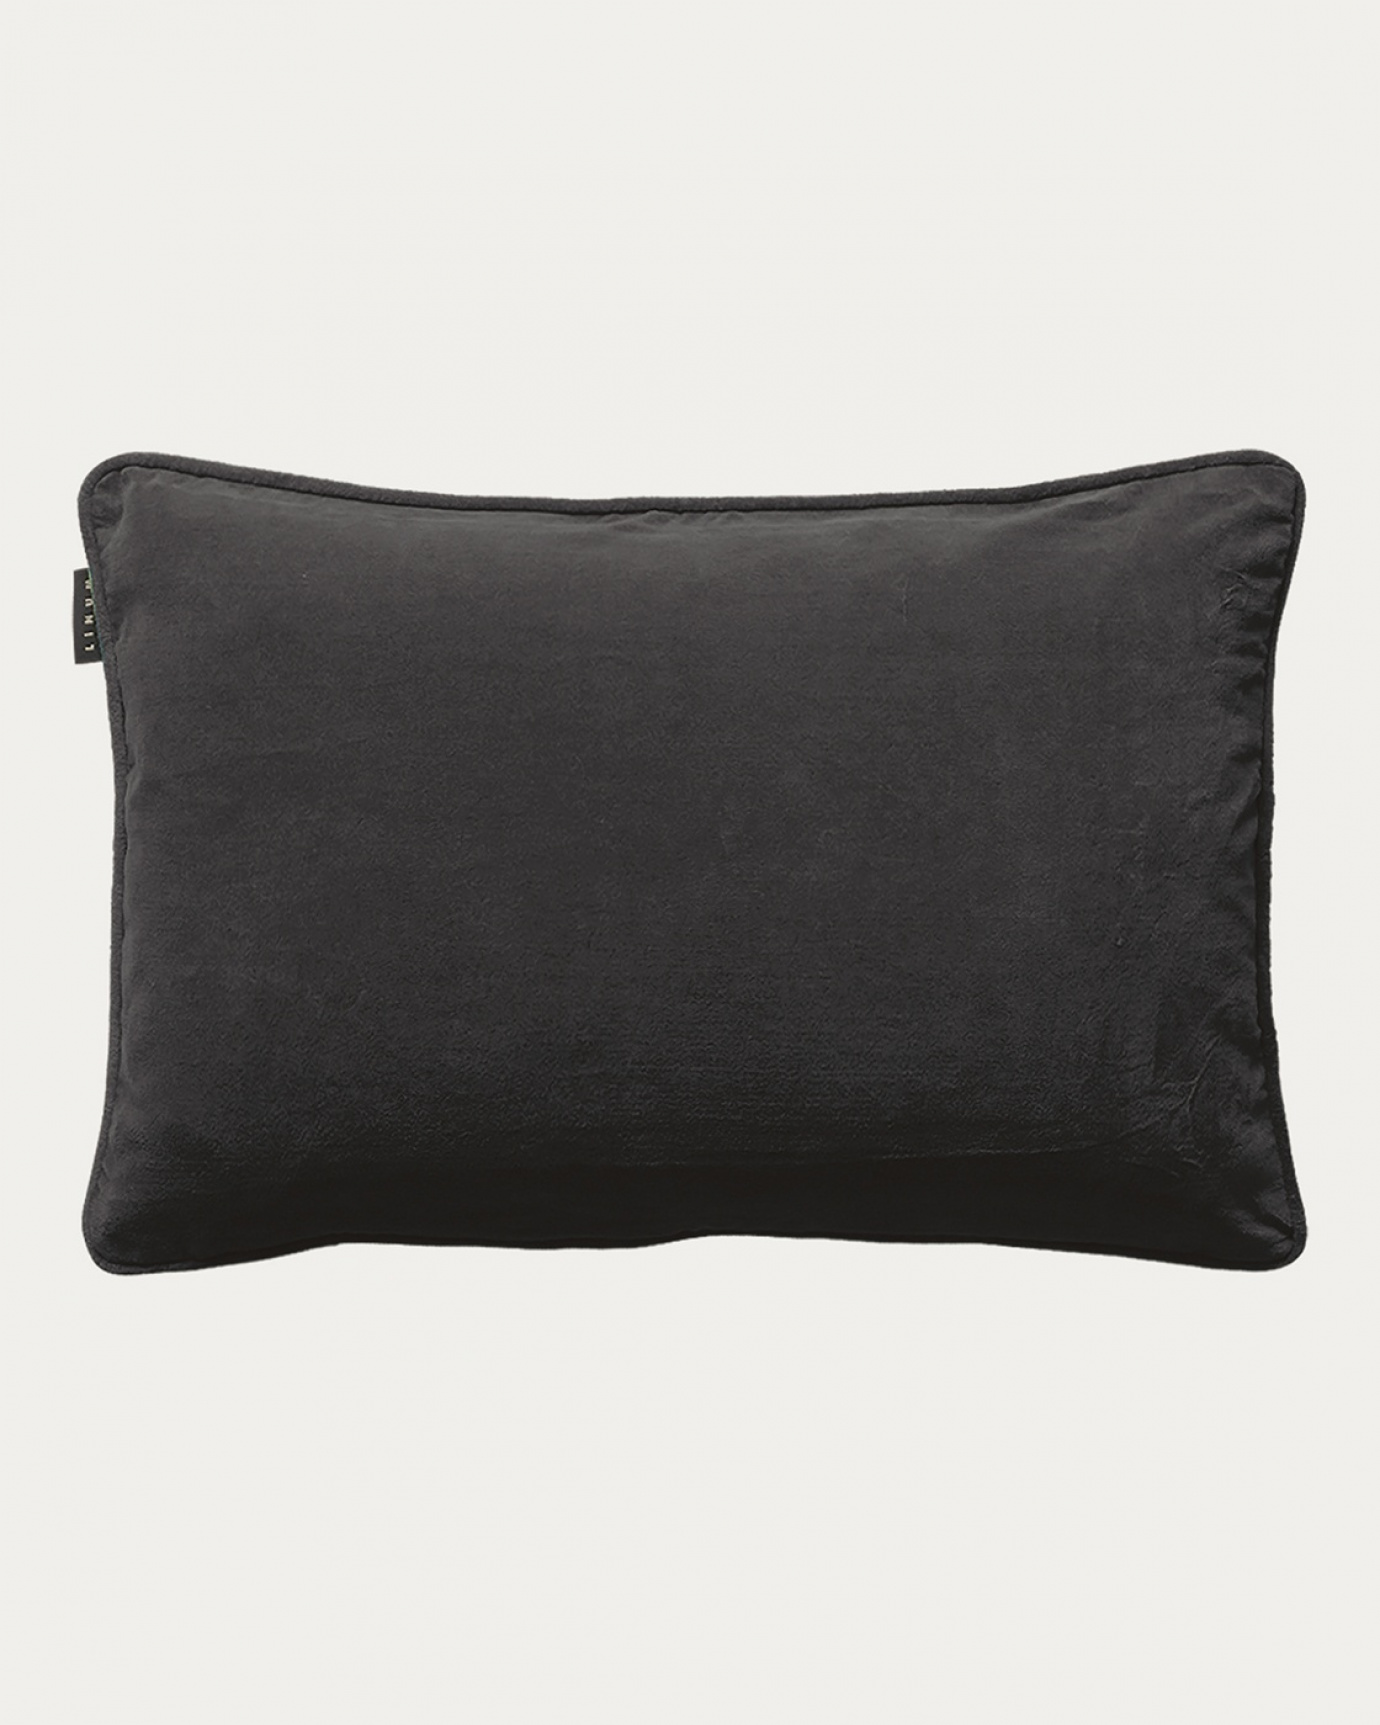 Product image dark charcoal grey PAOLO cushion cover in soft cotton velvet from LINUM DESIGN. Size 40x60 cm.